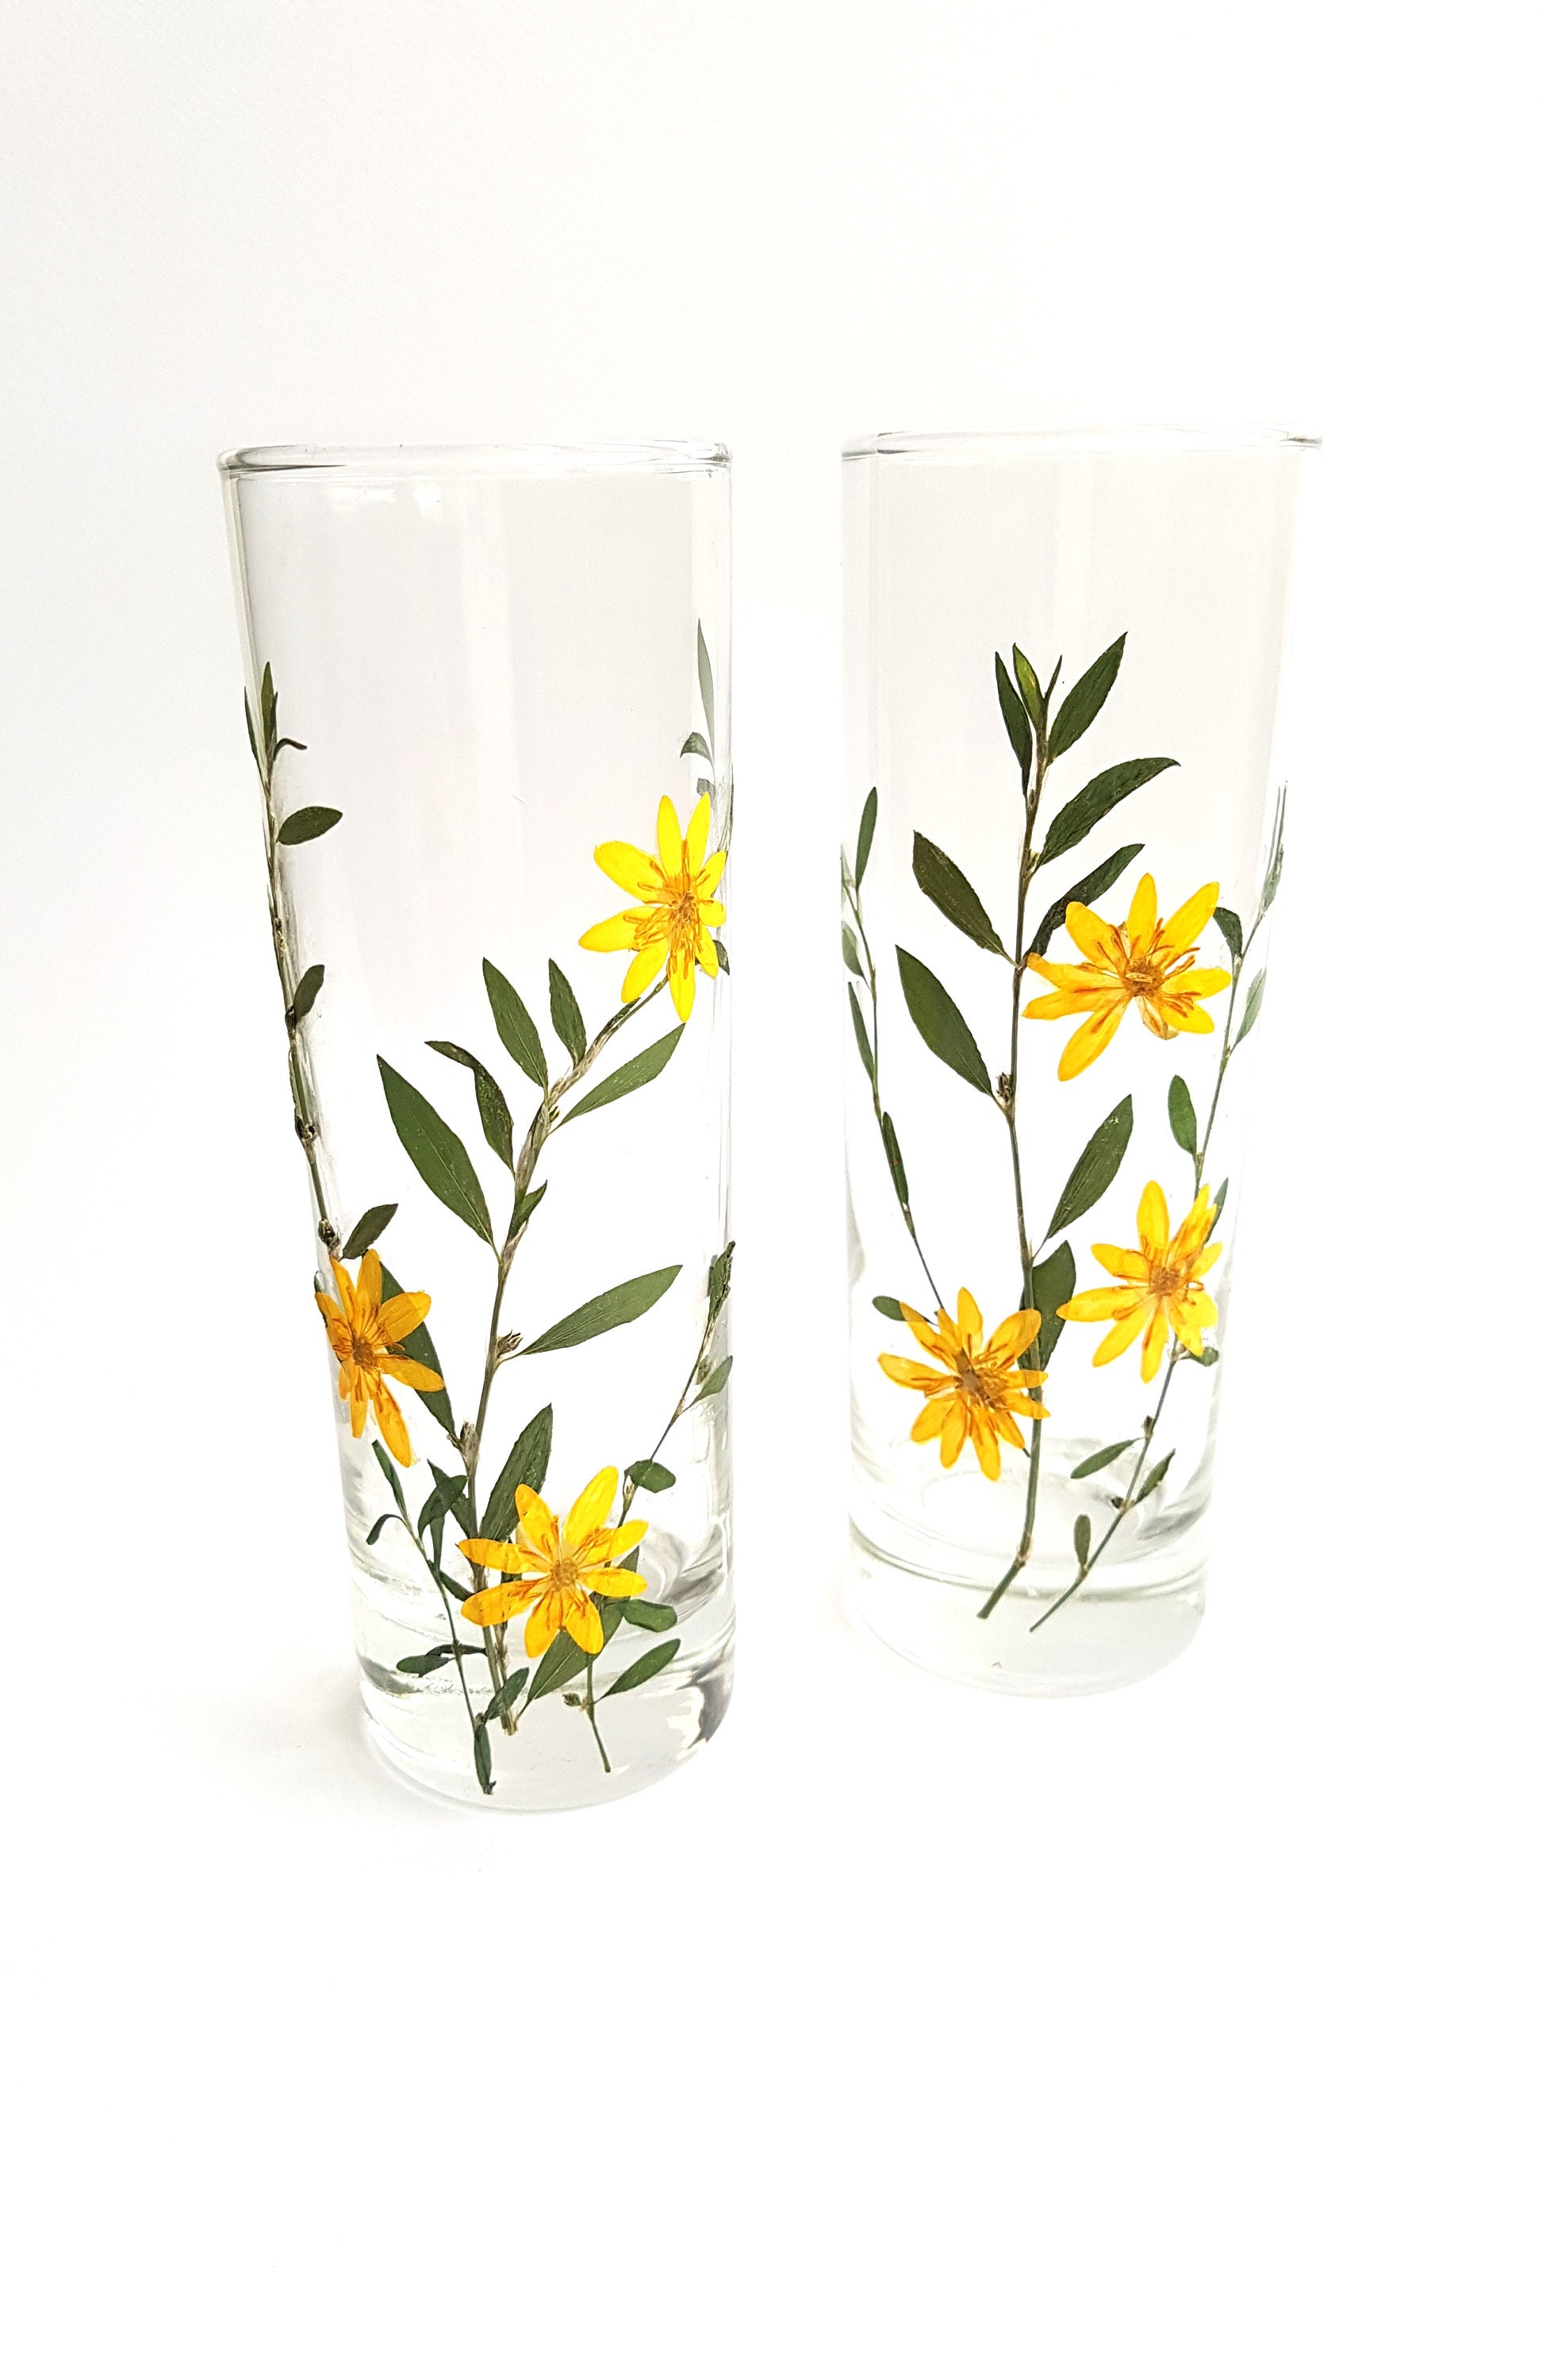 Pressed Flowers Glasses Water Glasses Hand Painted Glasses Drink ware Glassware,Drinkin g Glasses,Set of 2,Christmas gift Juice Glasses